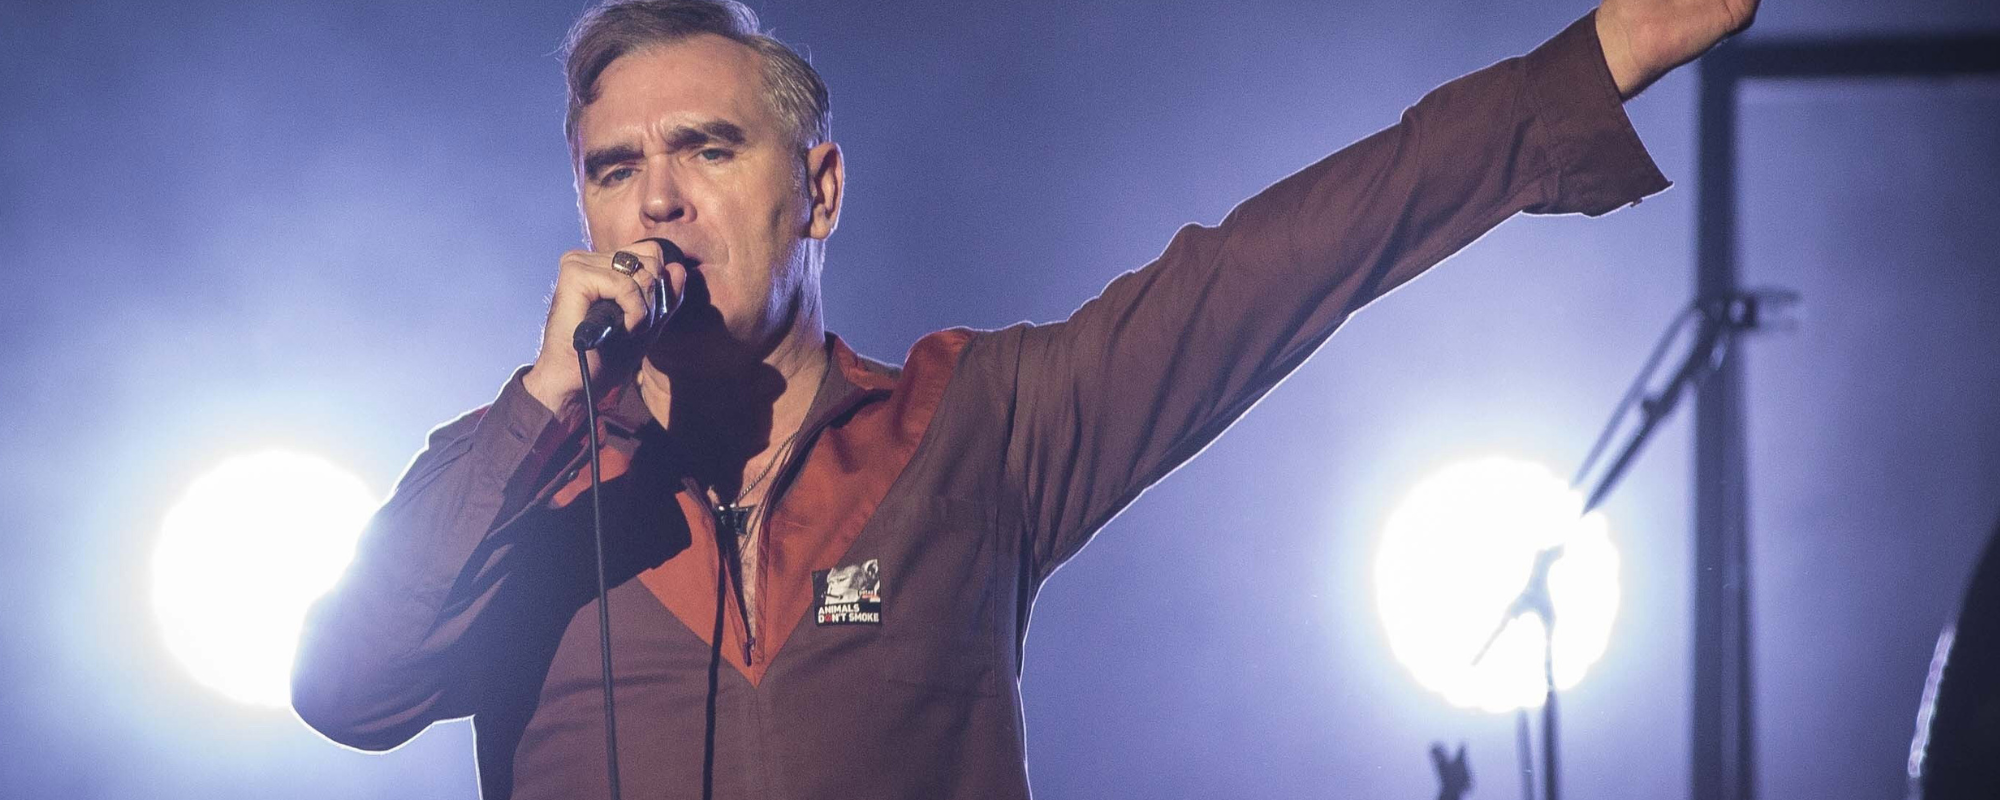 3 Songs You Didn’t Know Morrissey Wrote